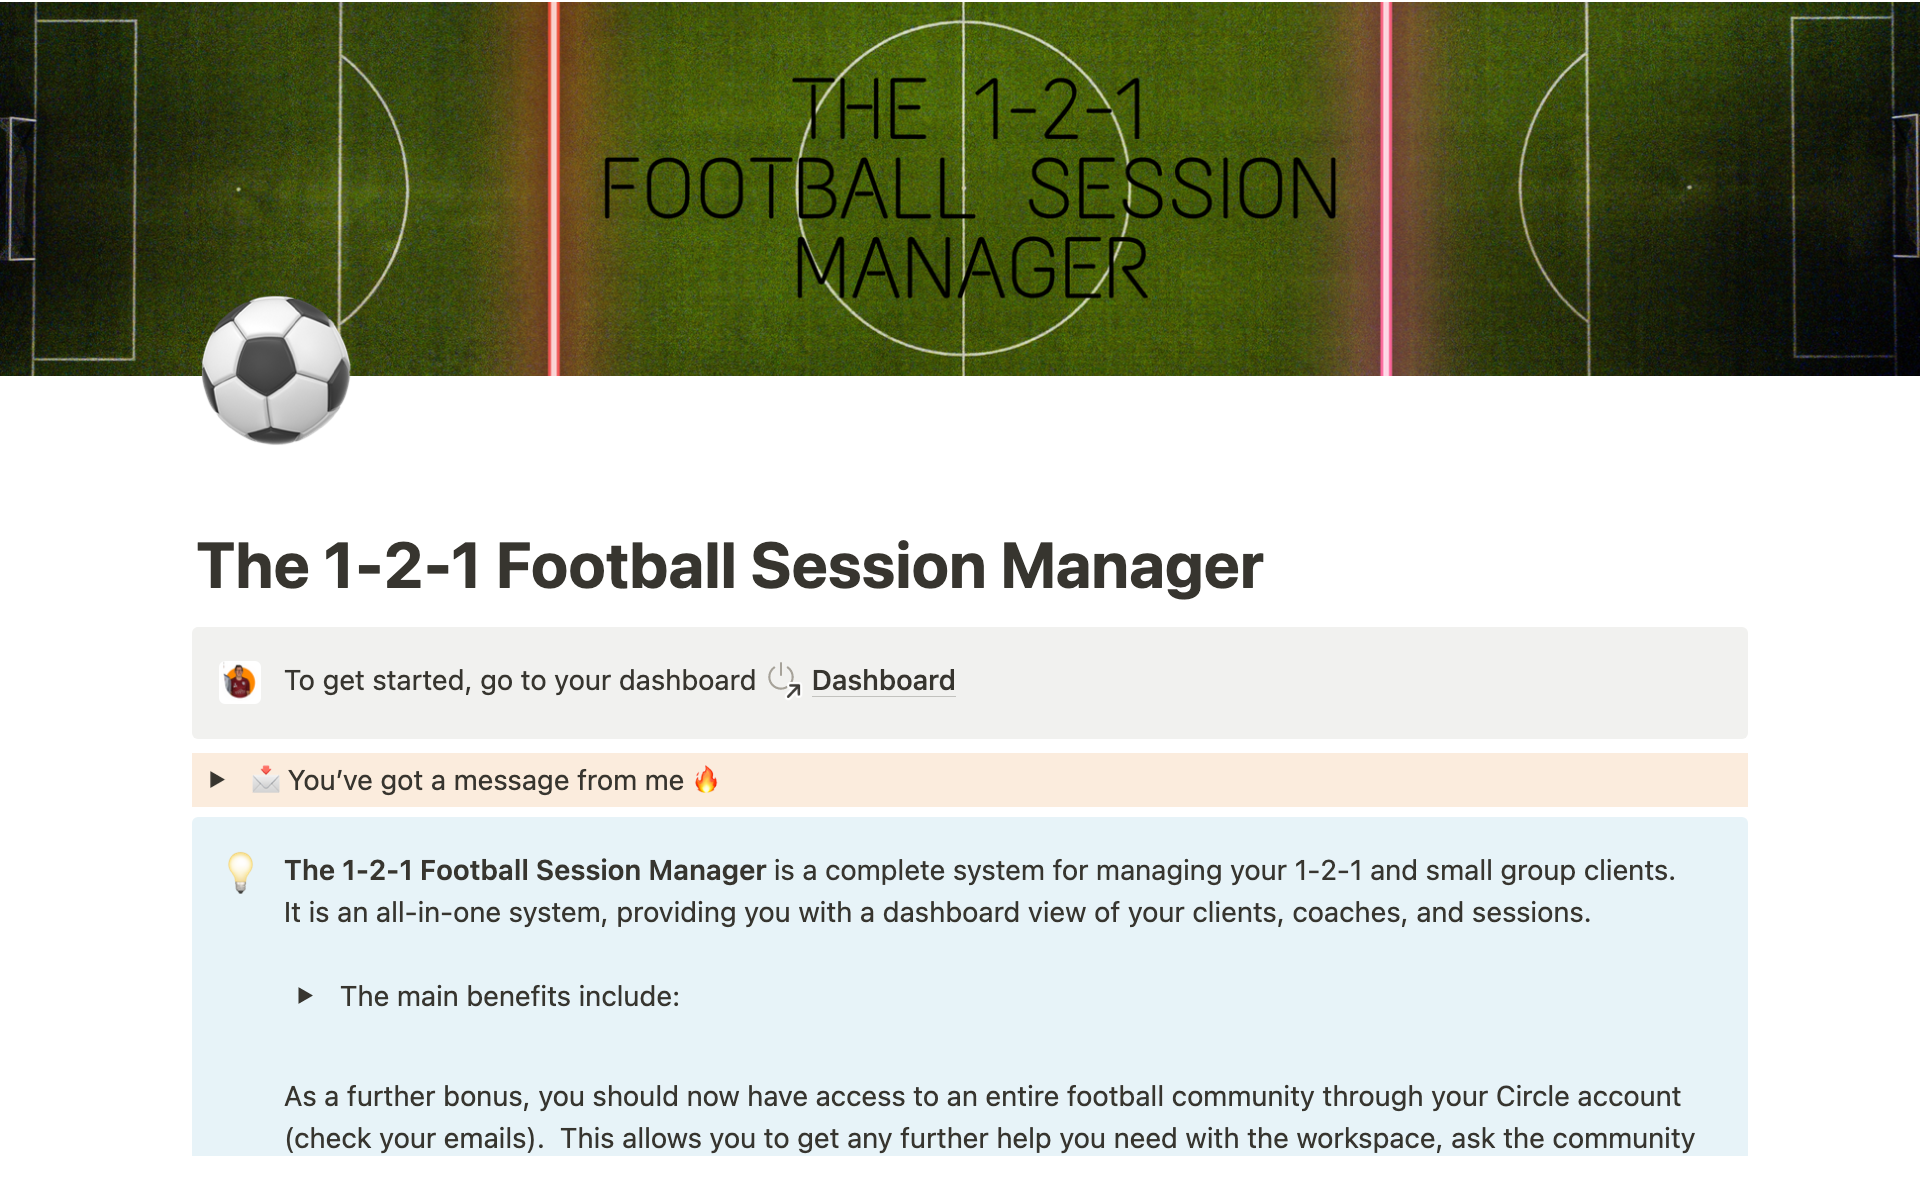 The 1-2-1 Football Session Manager is a complete system for managing your 1-2-1 and small group clients.